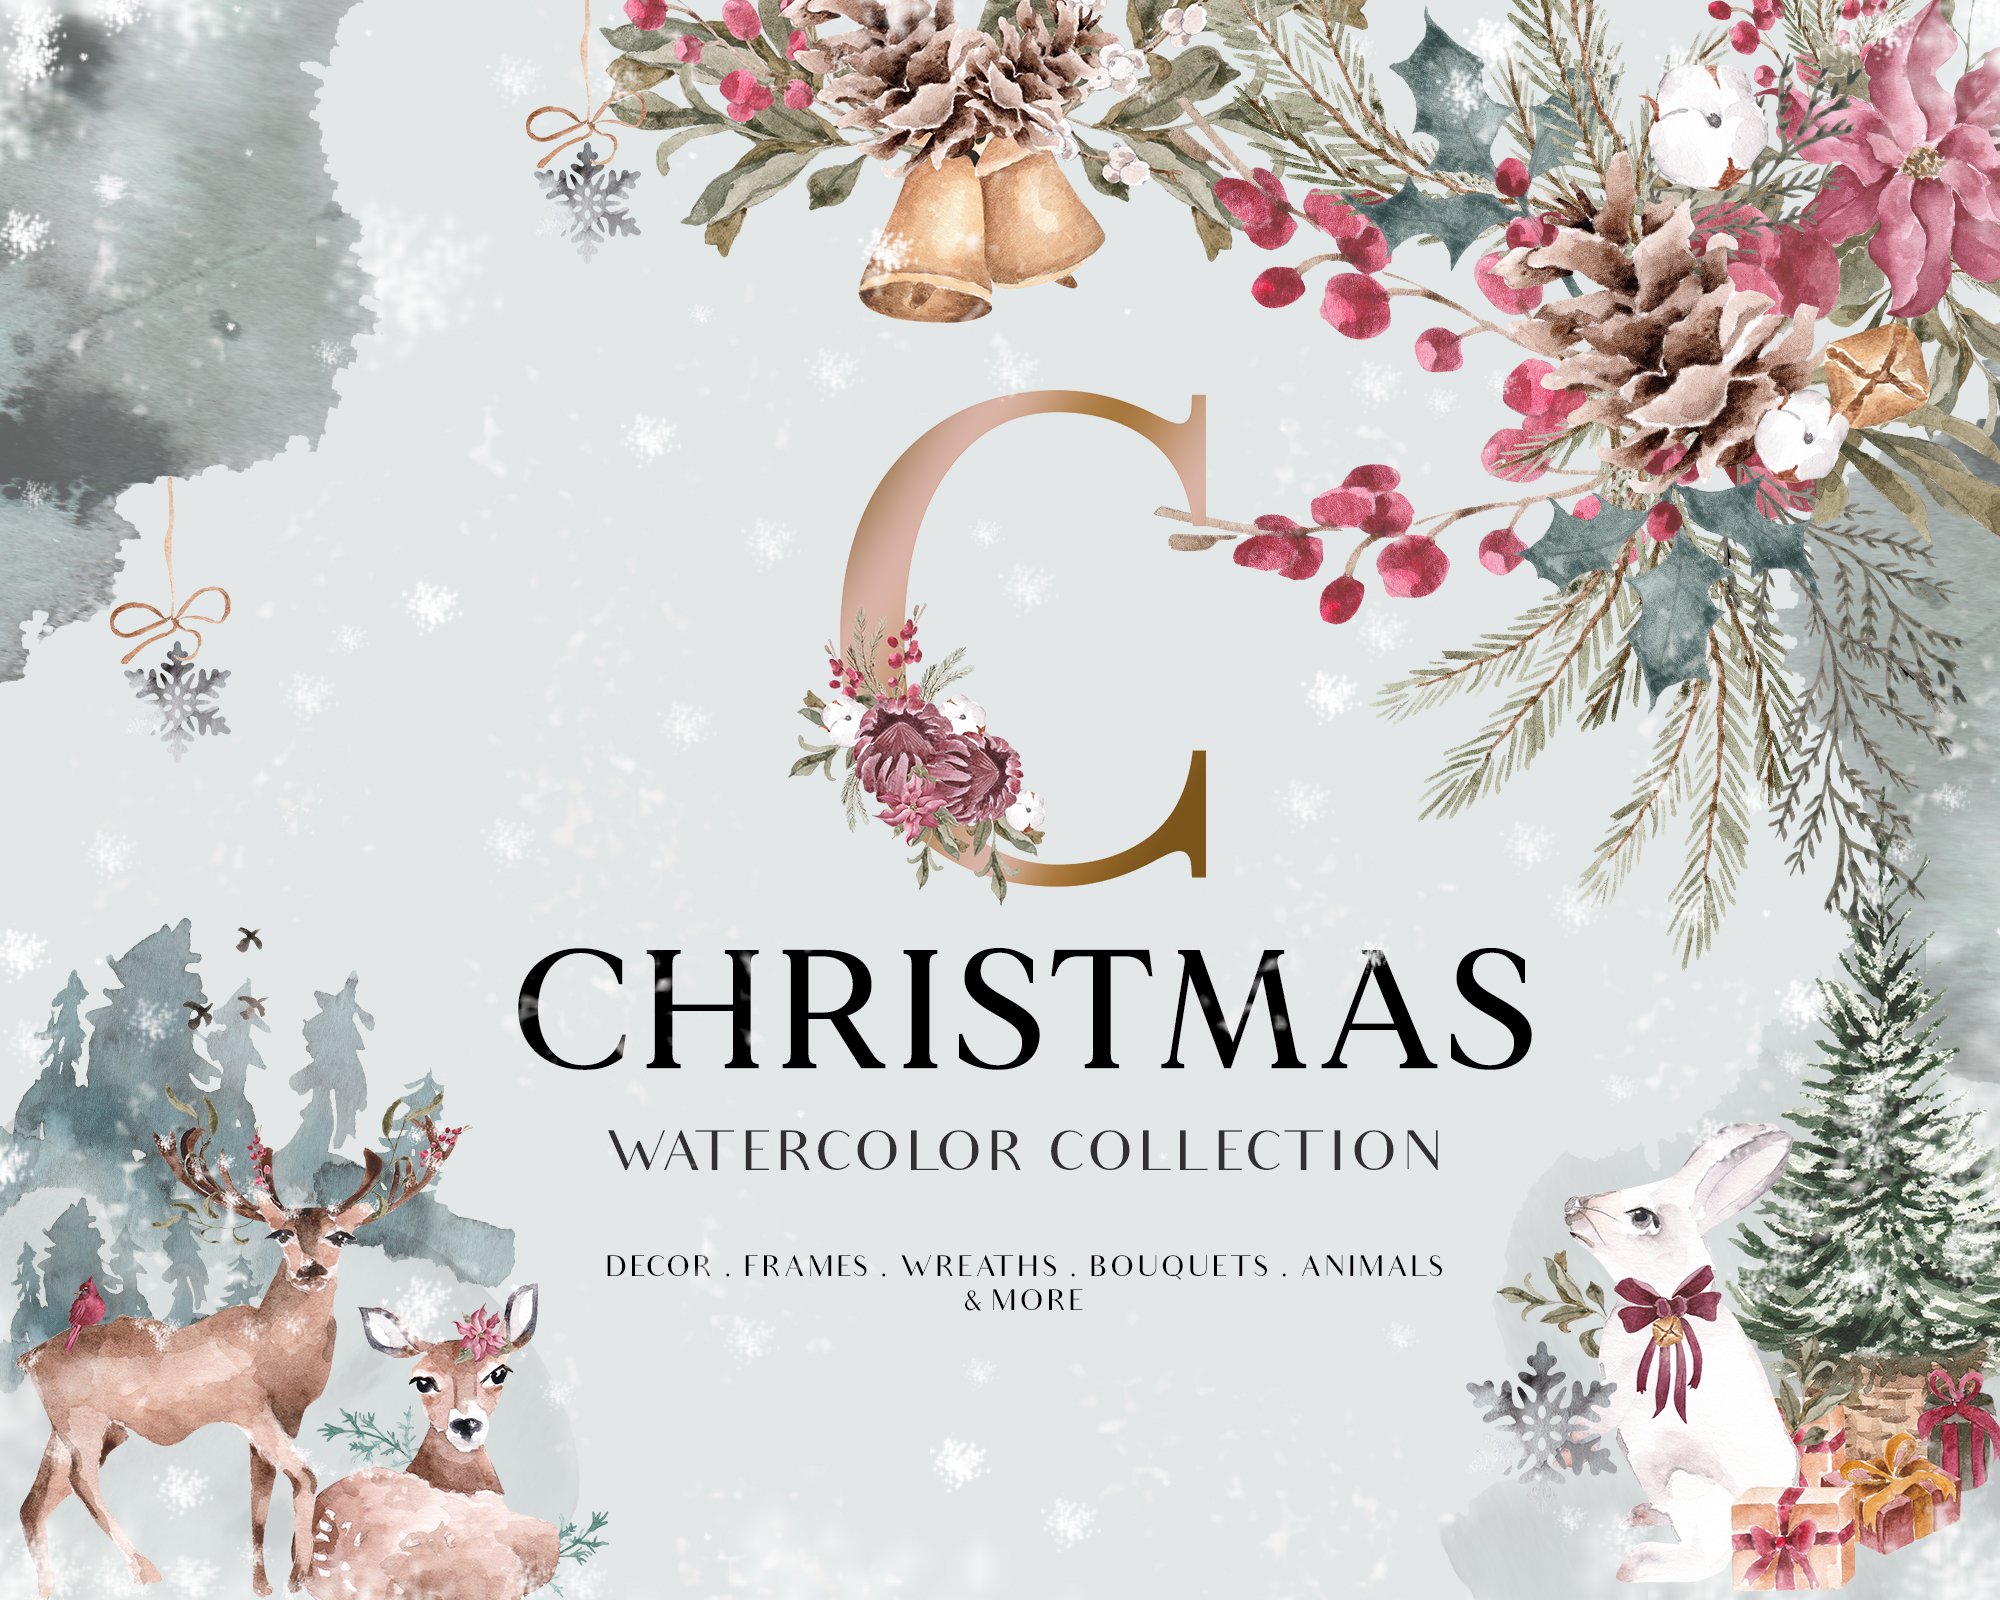 Watercolor Christmas greenery clipart, Winter collection